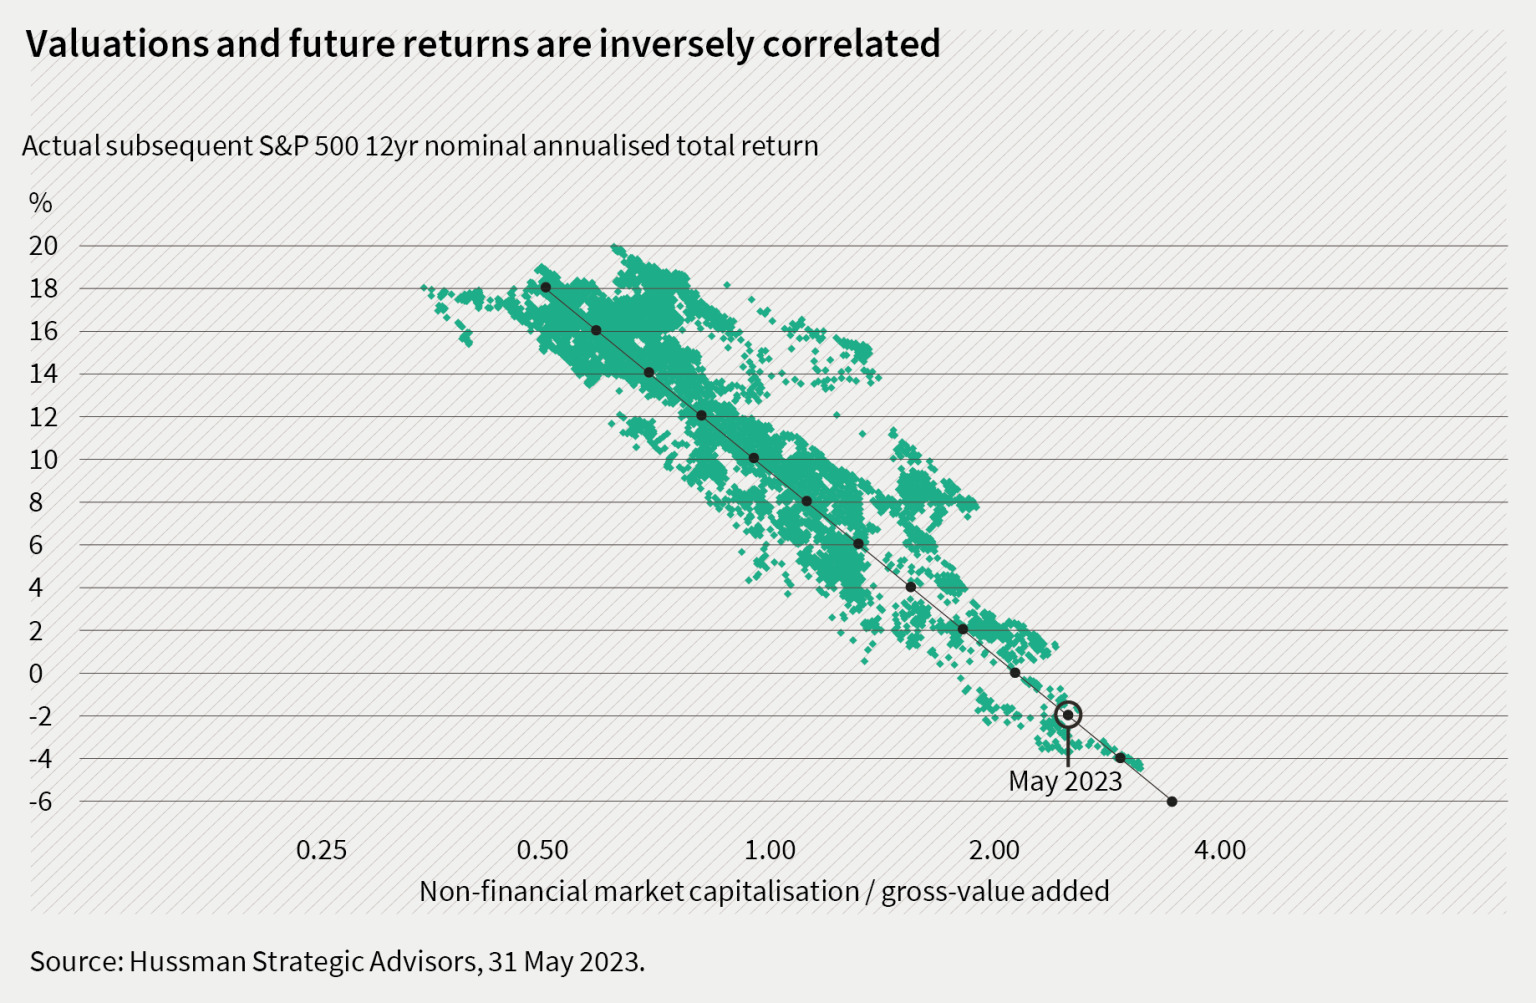 Valuations and future returns are inversely correlated